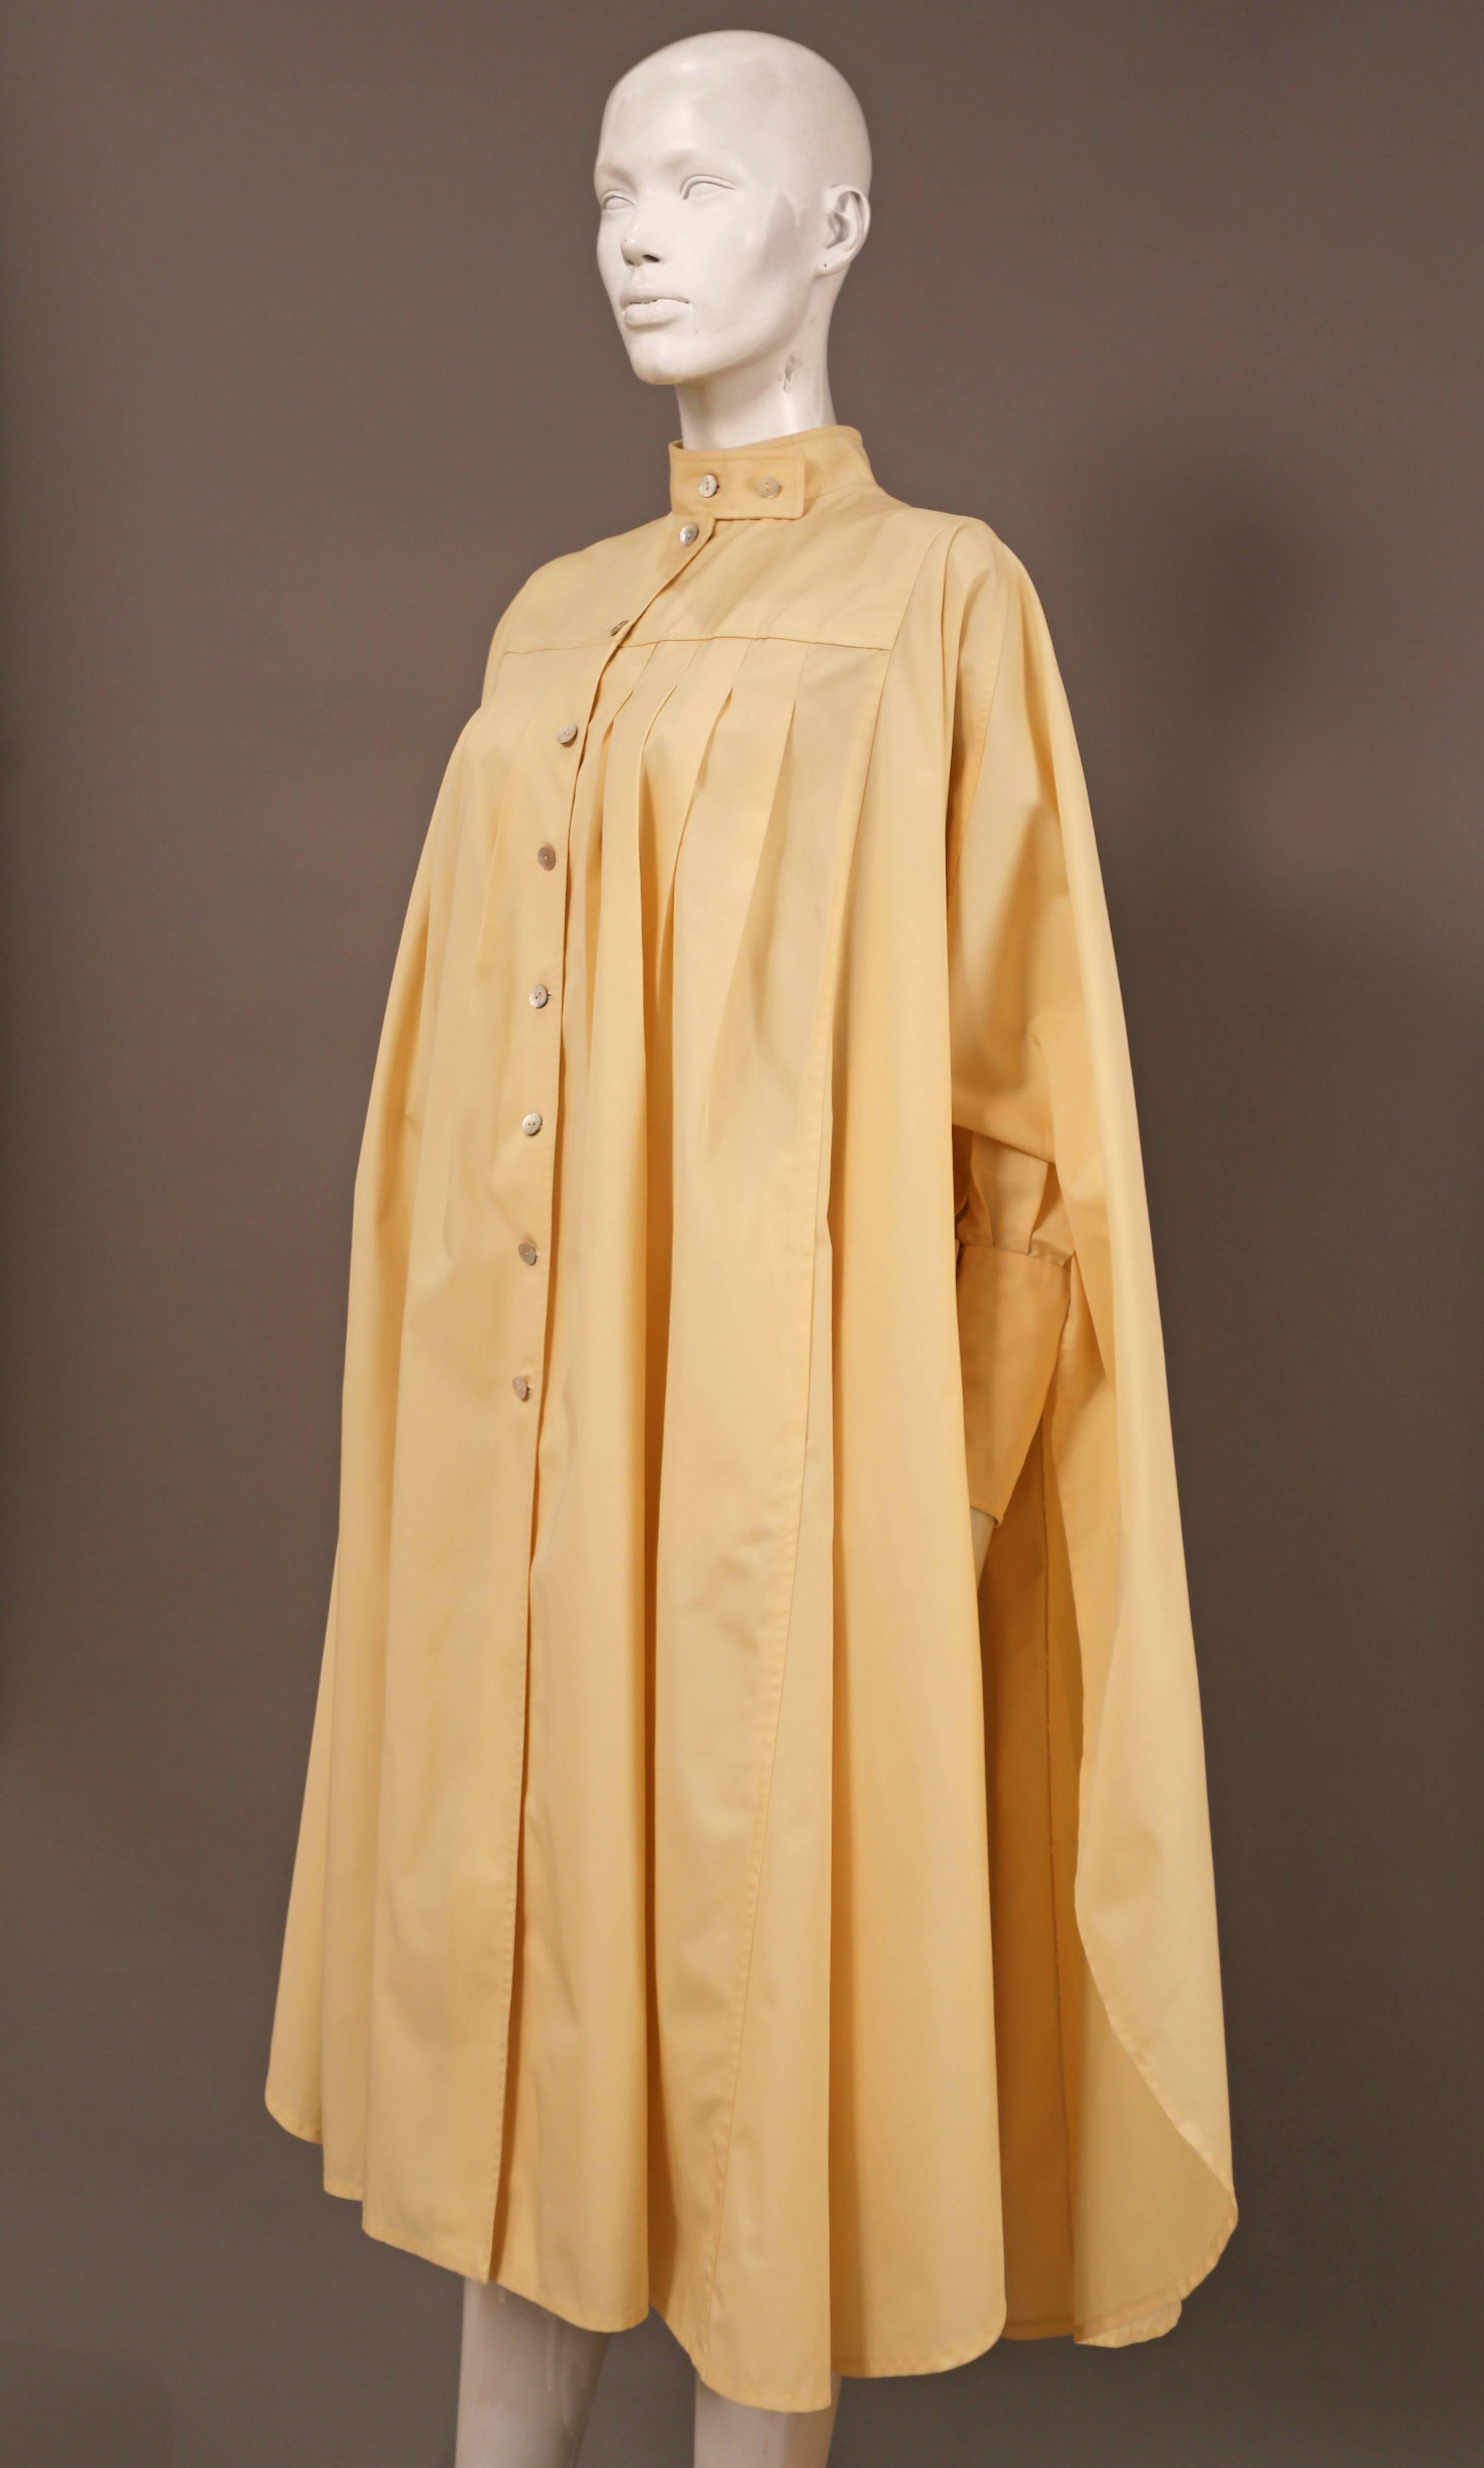 Extravagant pleated opera coat by Bill Gibb from the autumn-winter 1978-79 collection. The coat features shell button closure, high standing collar, two hidden side pockets, box pleats and extra long cuffs. 

UK 10  EU 38 

+ please note that